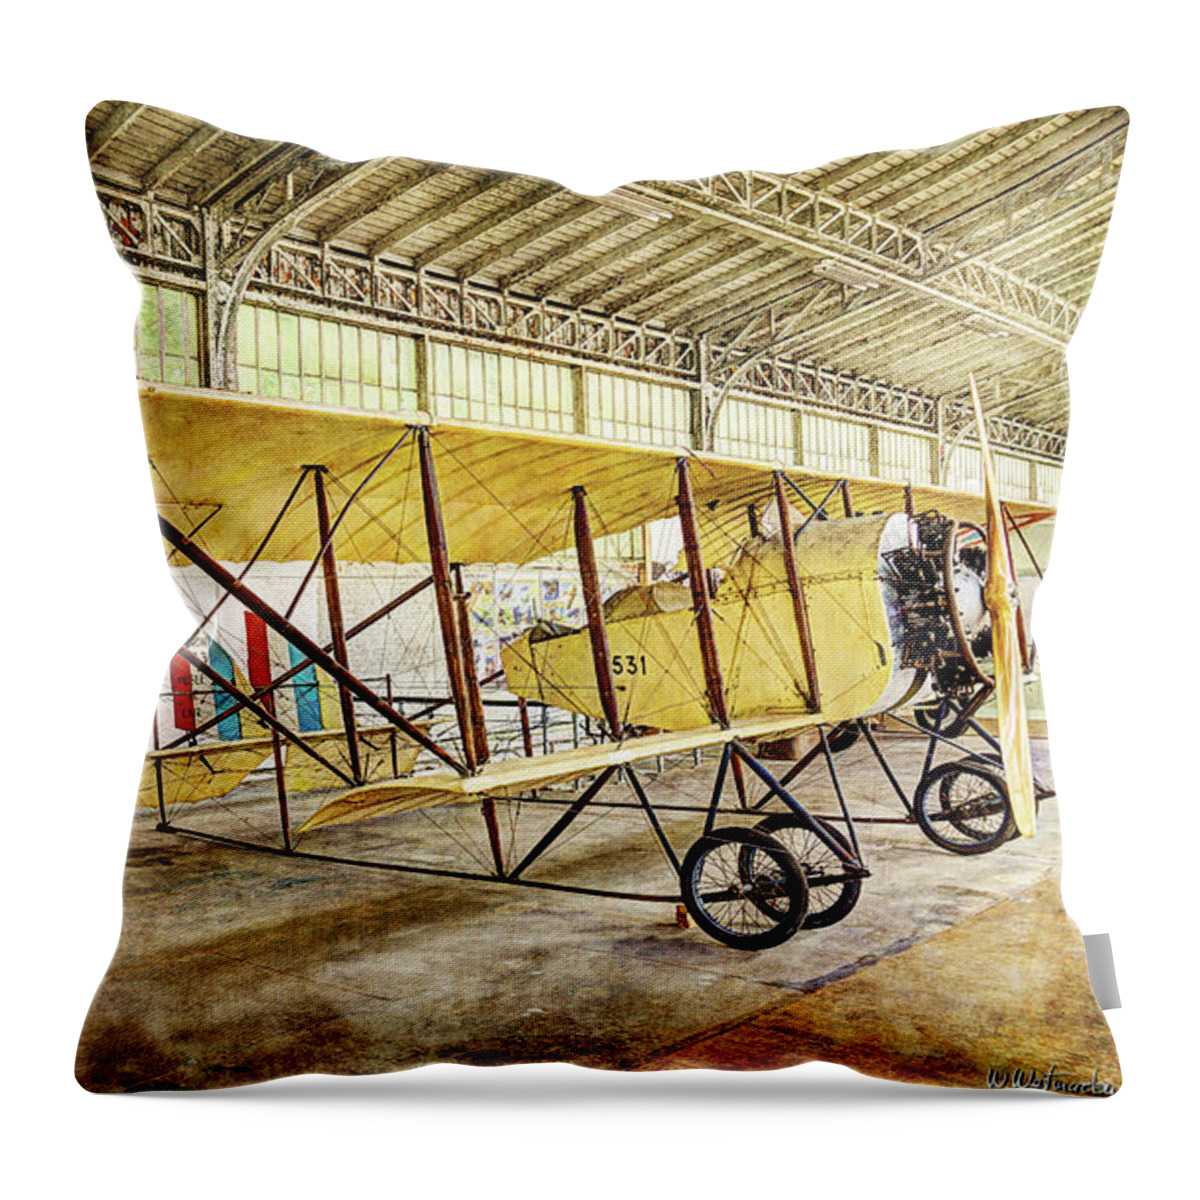 Caudron G3 Throw Pillow featuring the photograph Caudron G3 - Vintage by Weston Westmoreland